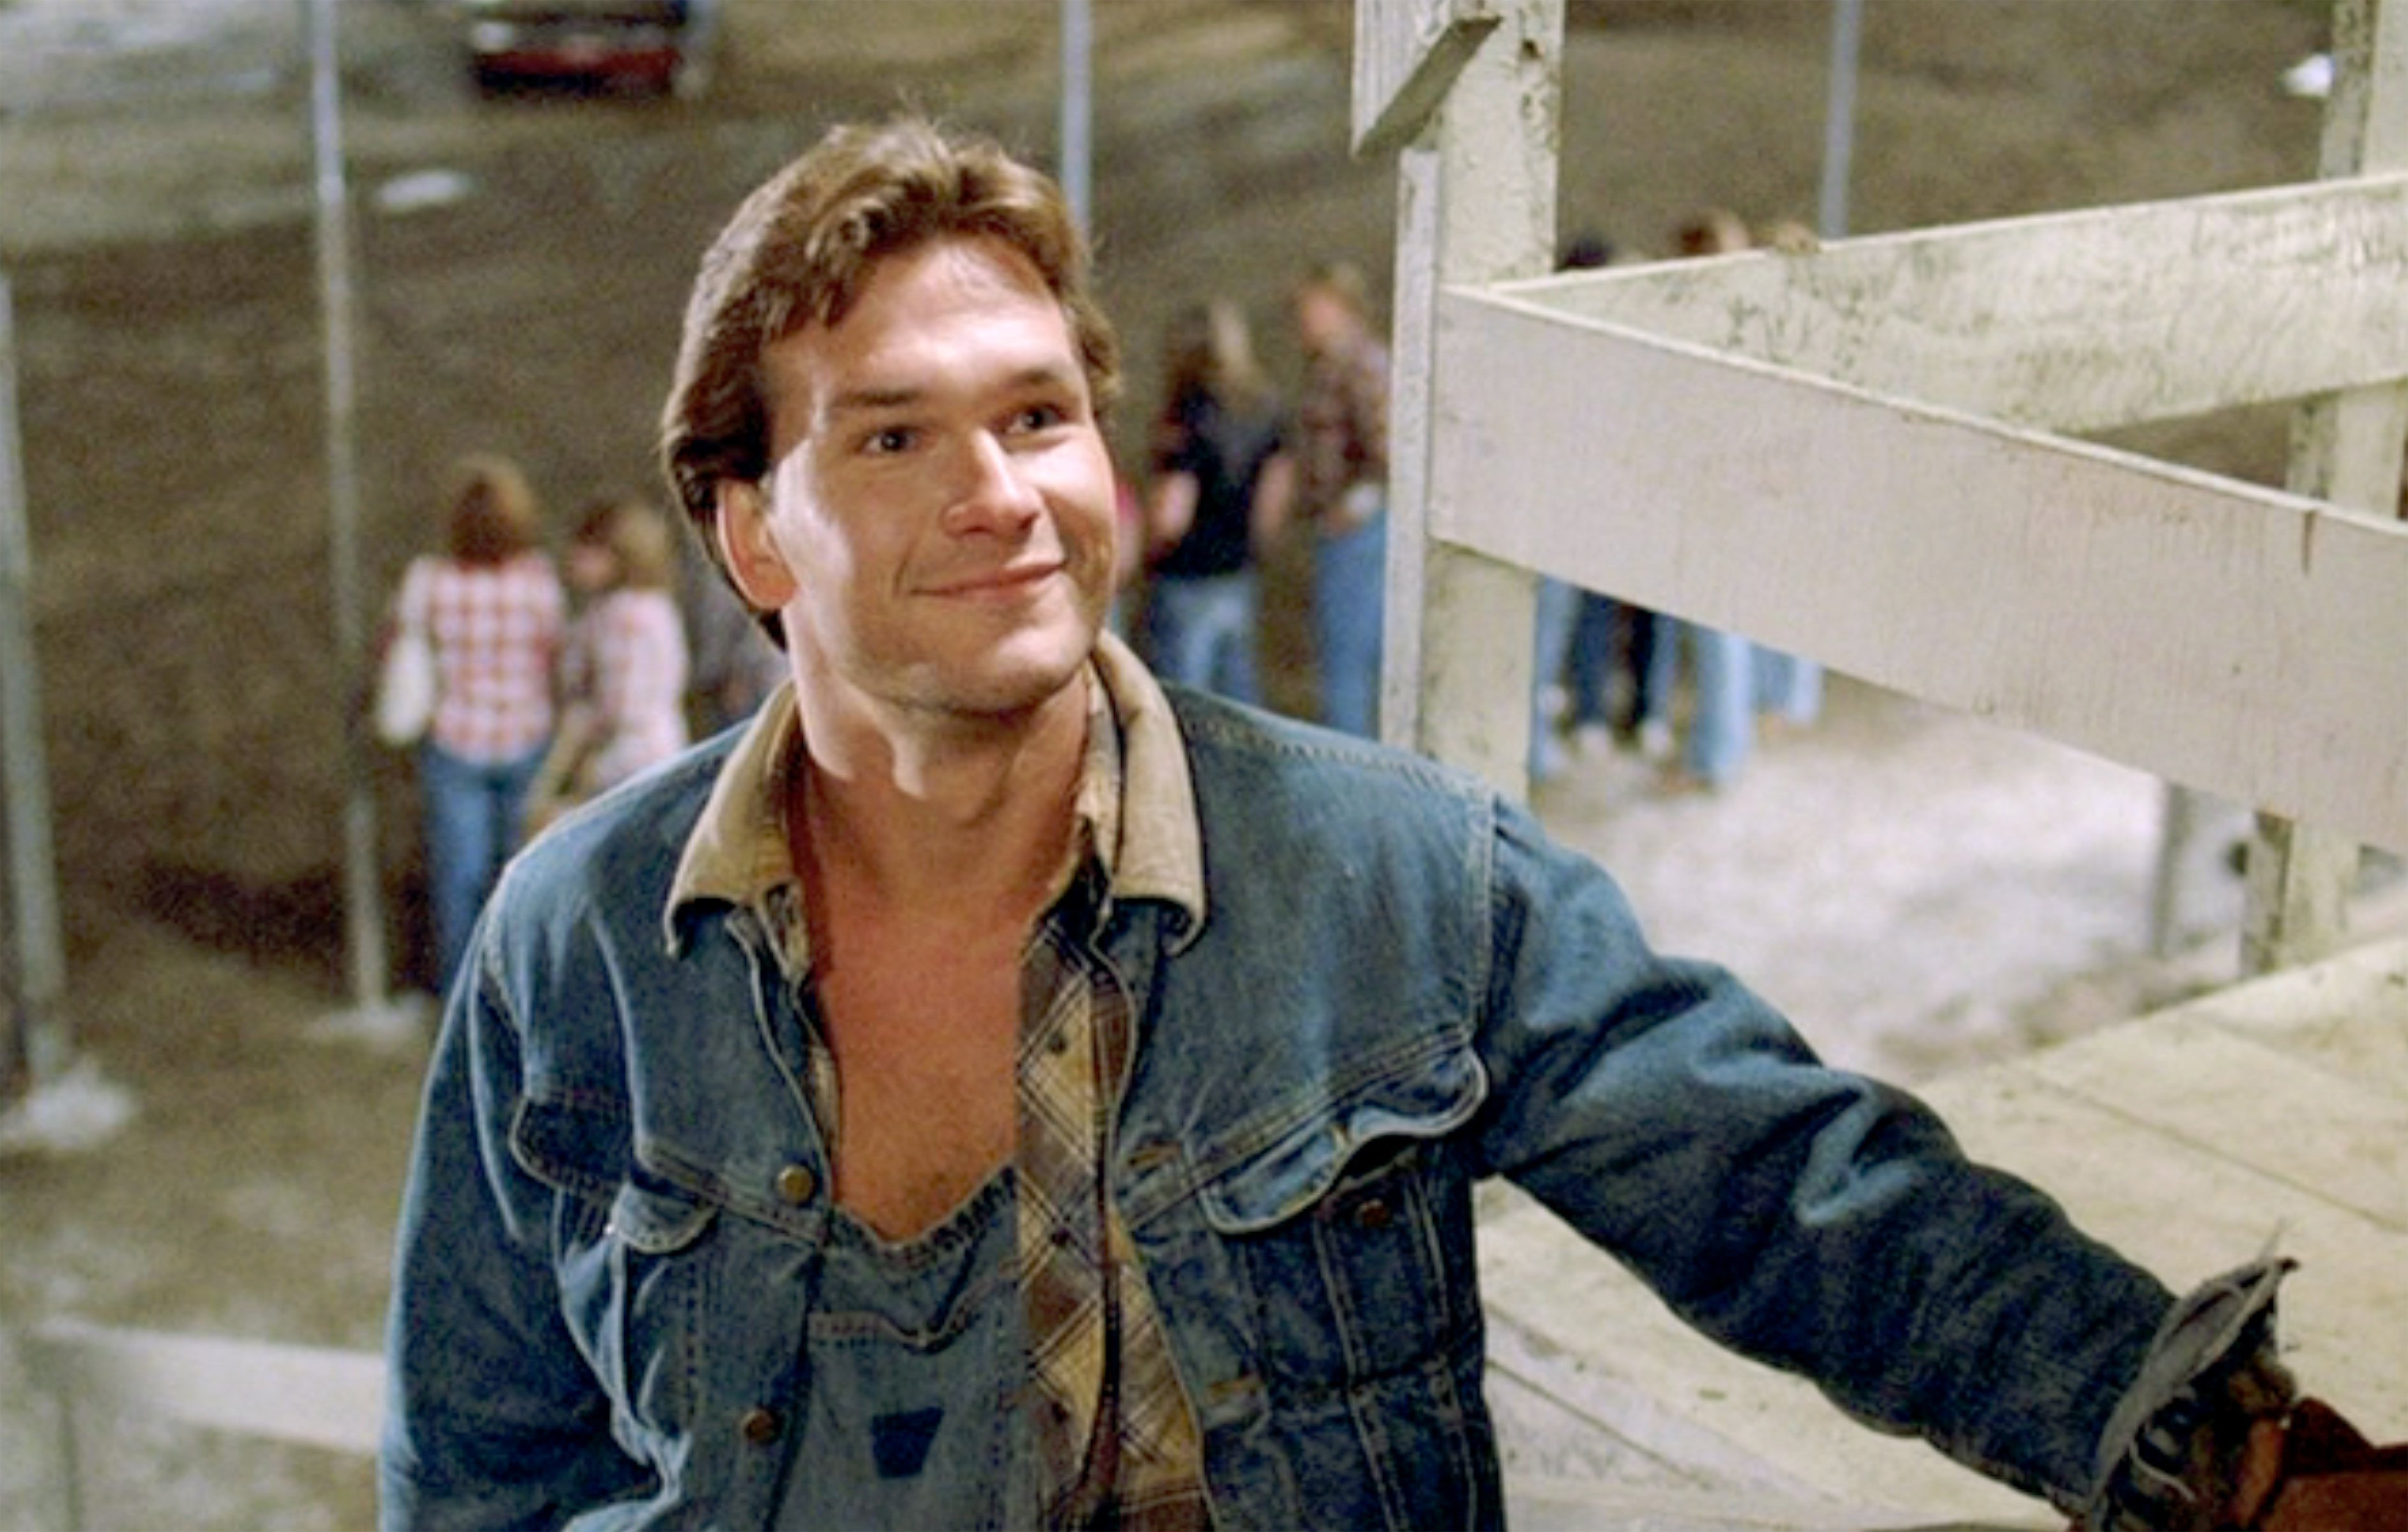 Patrick Swayze on the set of "Grandview, U.S.A." on August 3, 1984, in Pontiac | Source: Getty Images